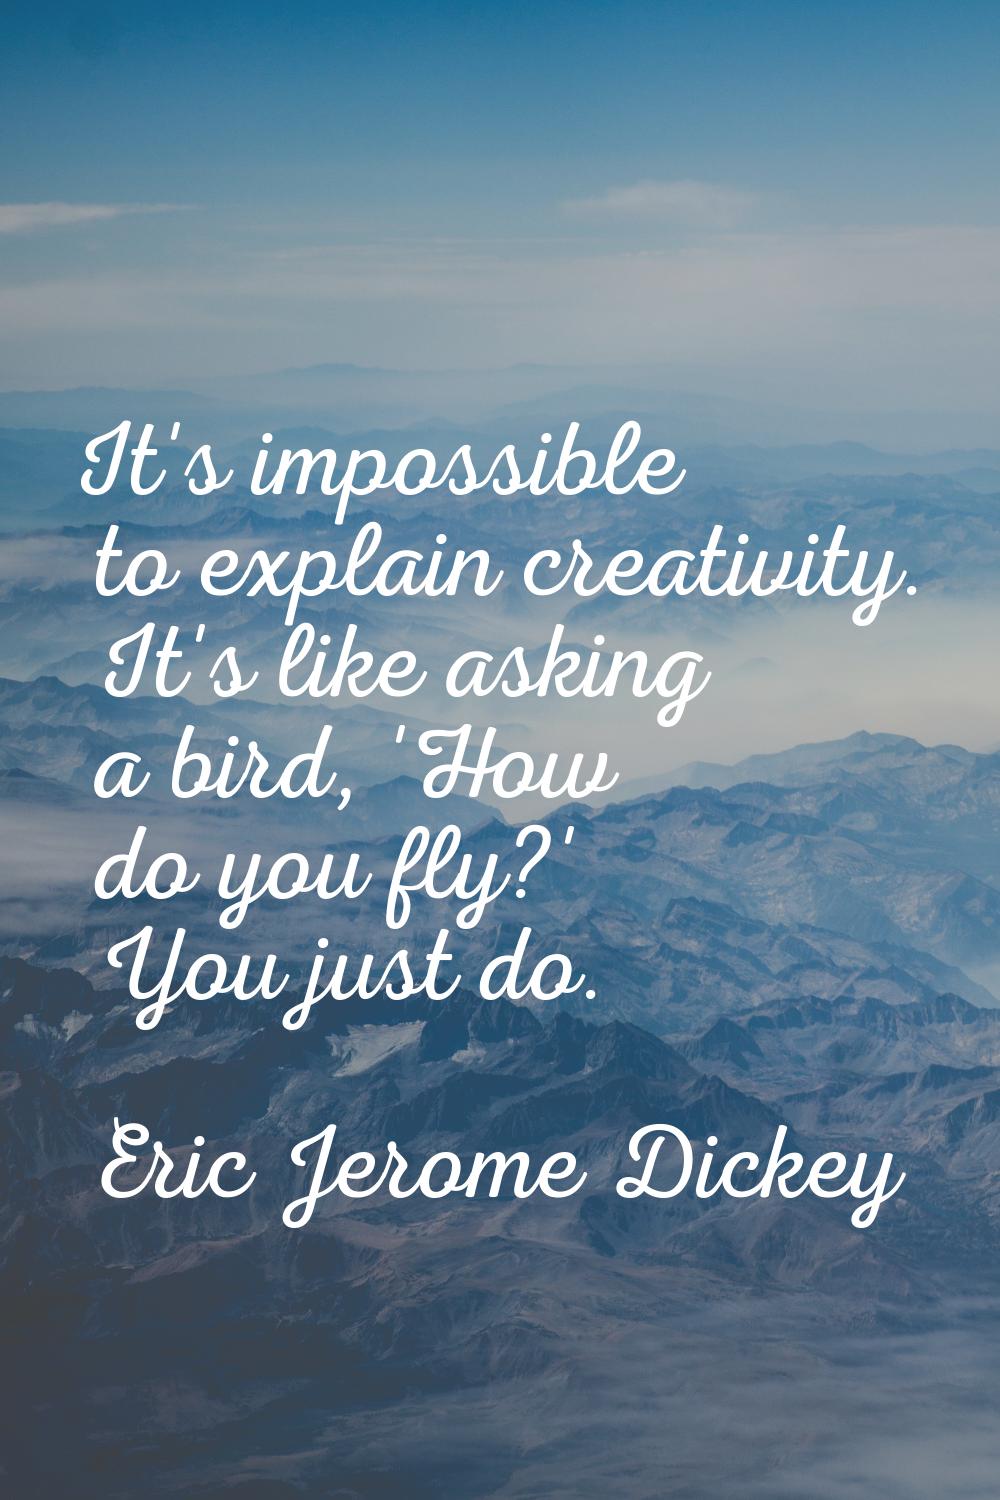 It's impossible to explain creativity. It's like asking a bird, 'How do you fly?' You just do.